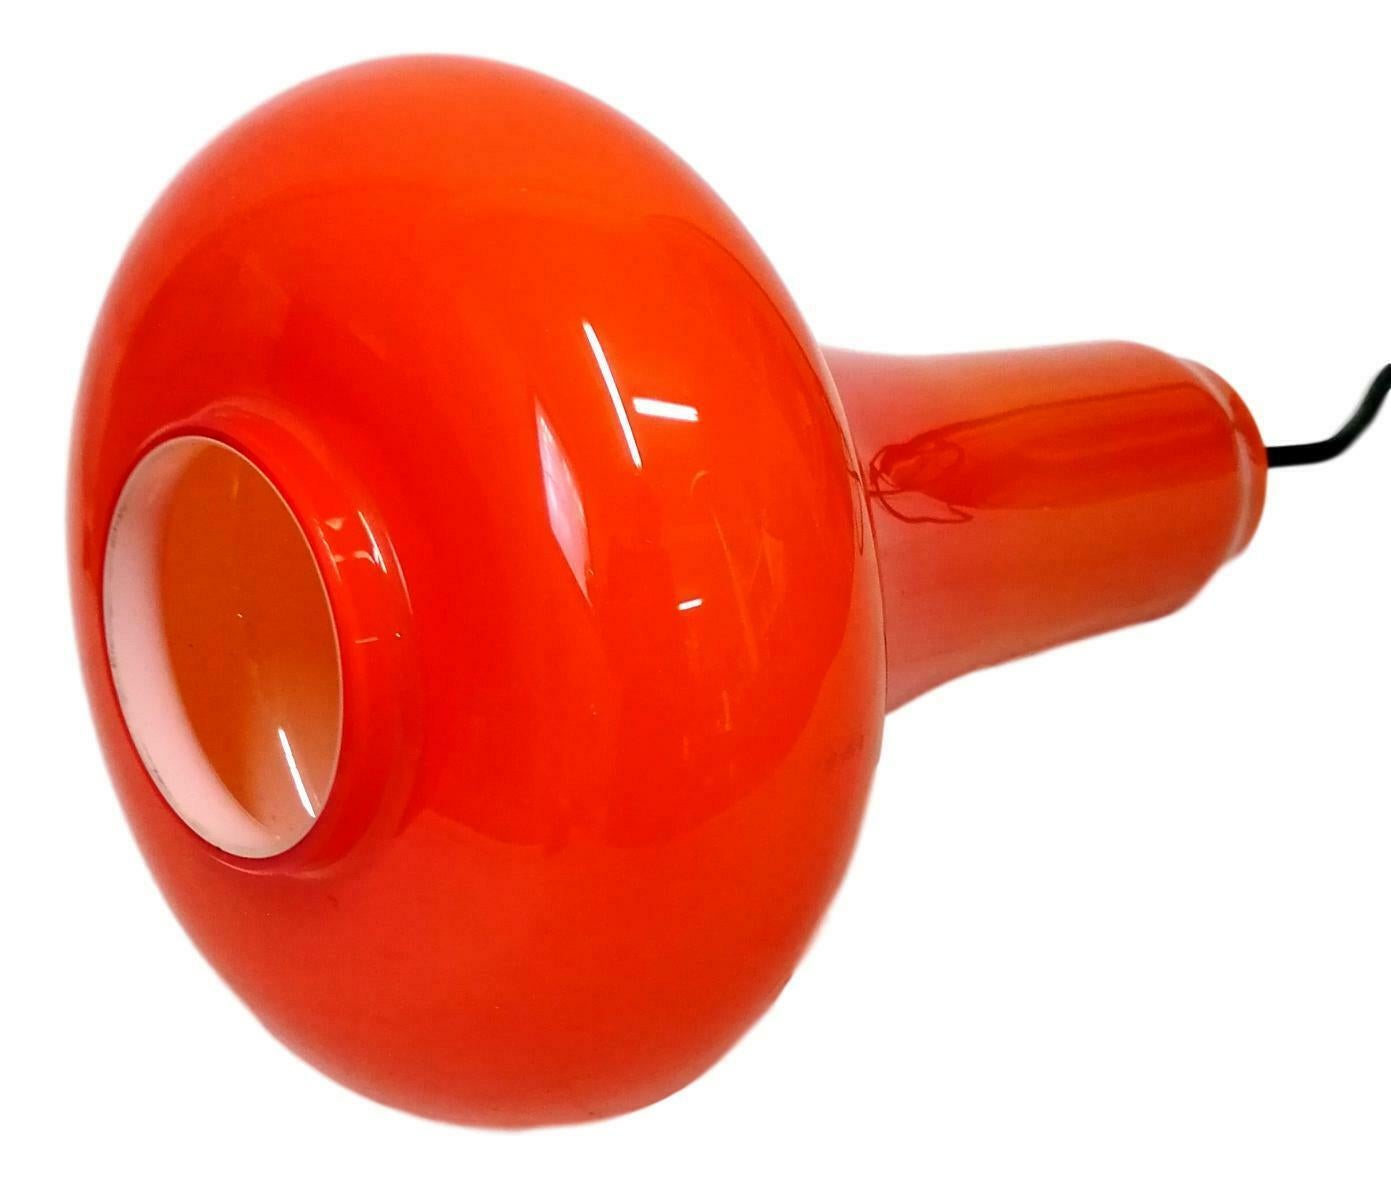 Suspension lamp design Massimo Vignelli for Venini 60s, original

Made of bright orange coated glass, original lamp holder of the time

It measures 26 cm in height, over hollow, 17 cm in diameter in the widest part

In excellent condition, as